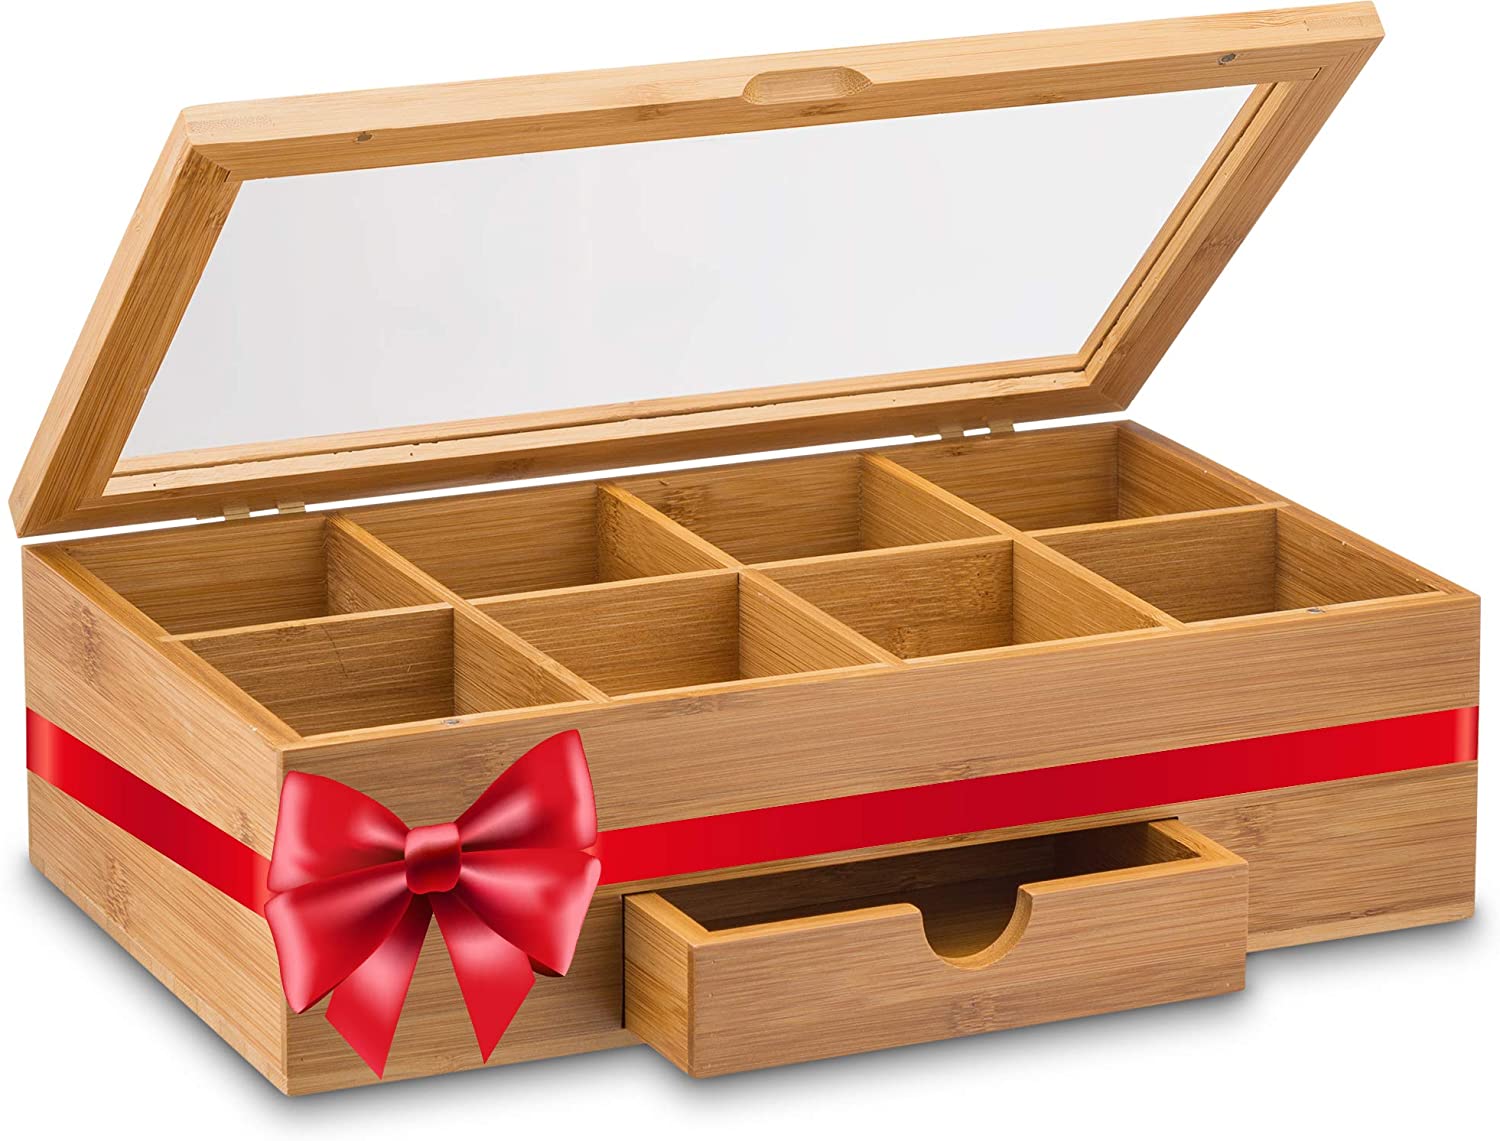 Natural Bamboo Tea Organizer - 6 Compartments, with Plastic Cover - 8 1/2  x 8 x 3 1/2 - 1 count box 